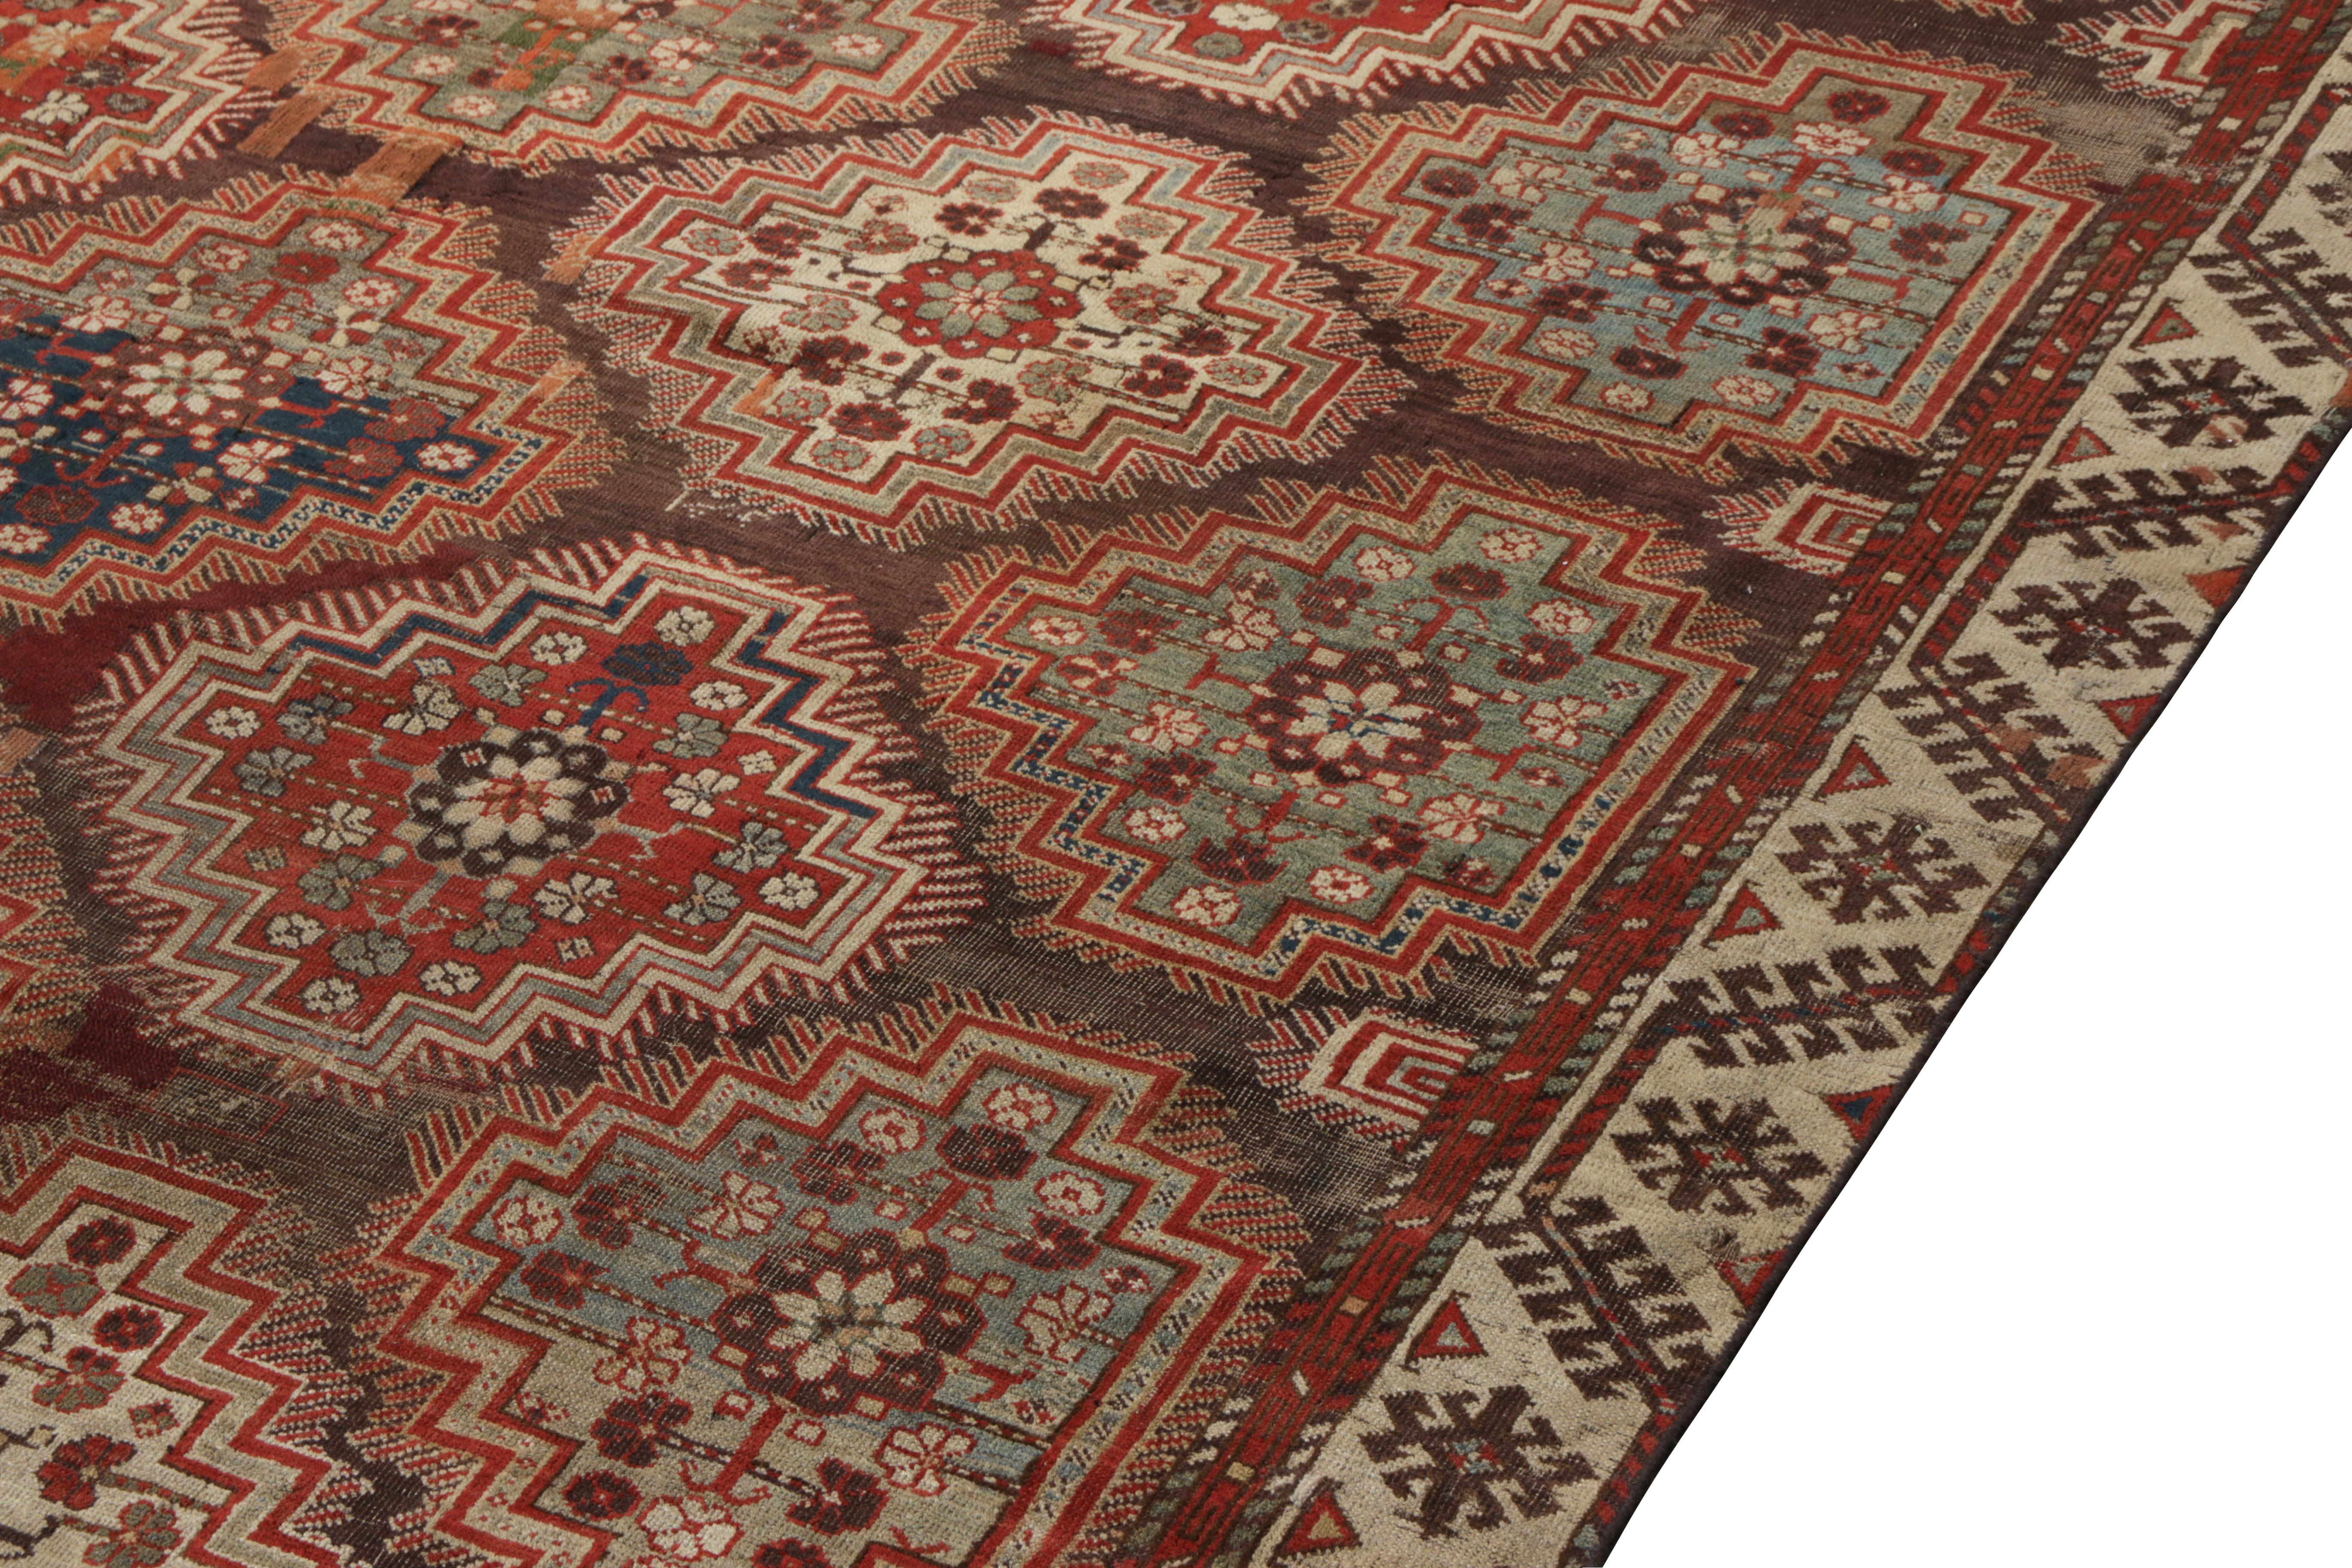 Hand-Knotted Antique Russian Kuba Rug in All over Red Brown, Geometric Pattern by Rug & Kilim For Sale